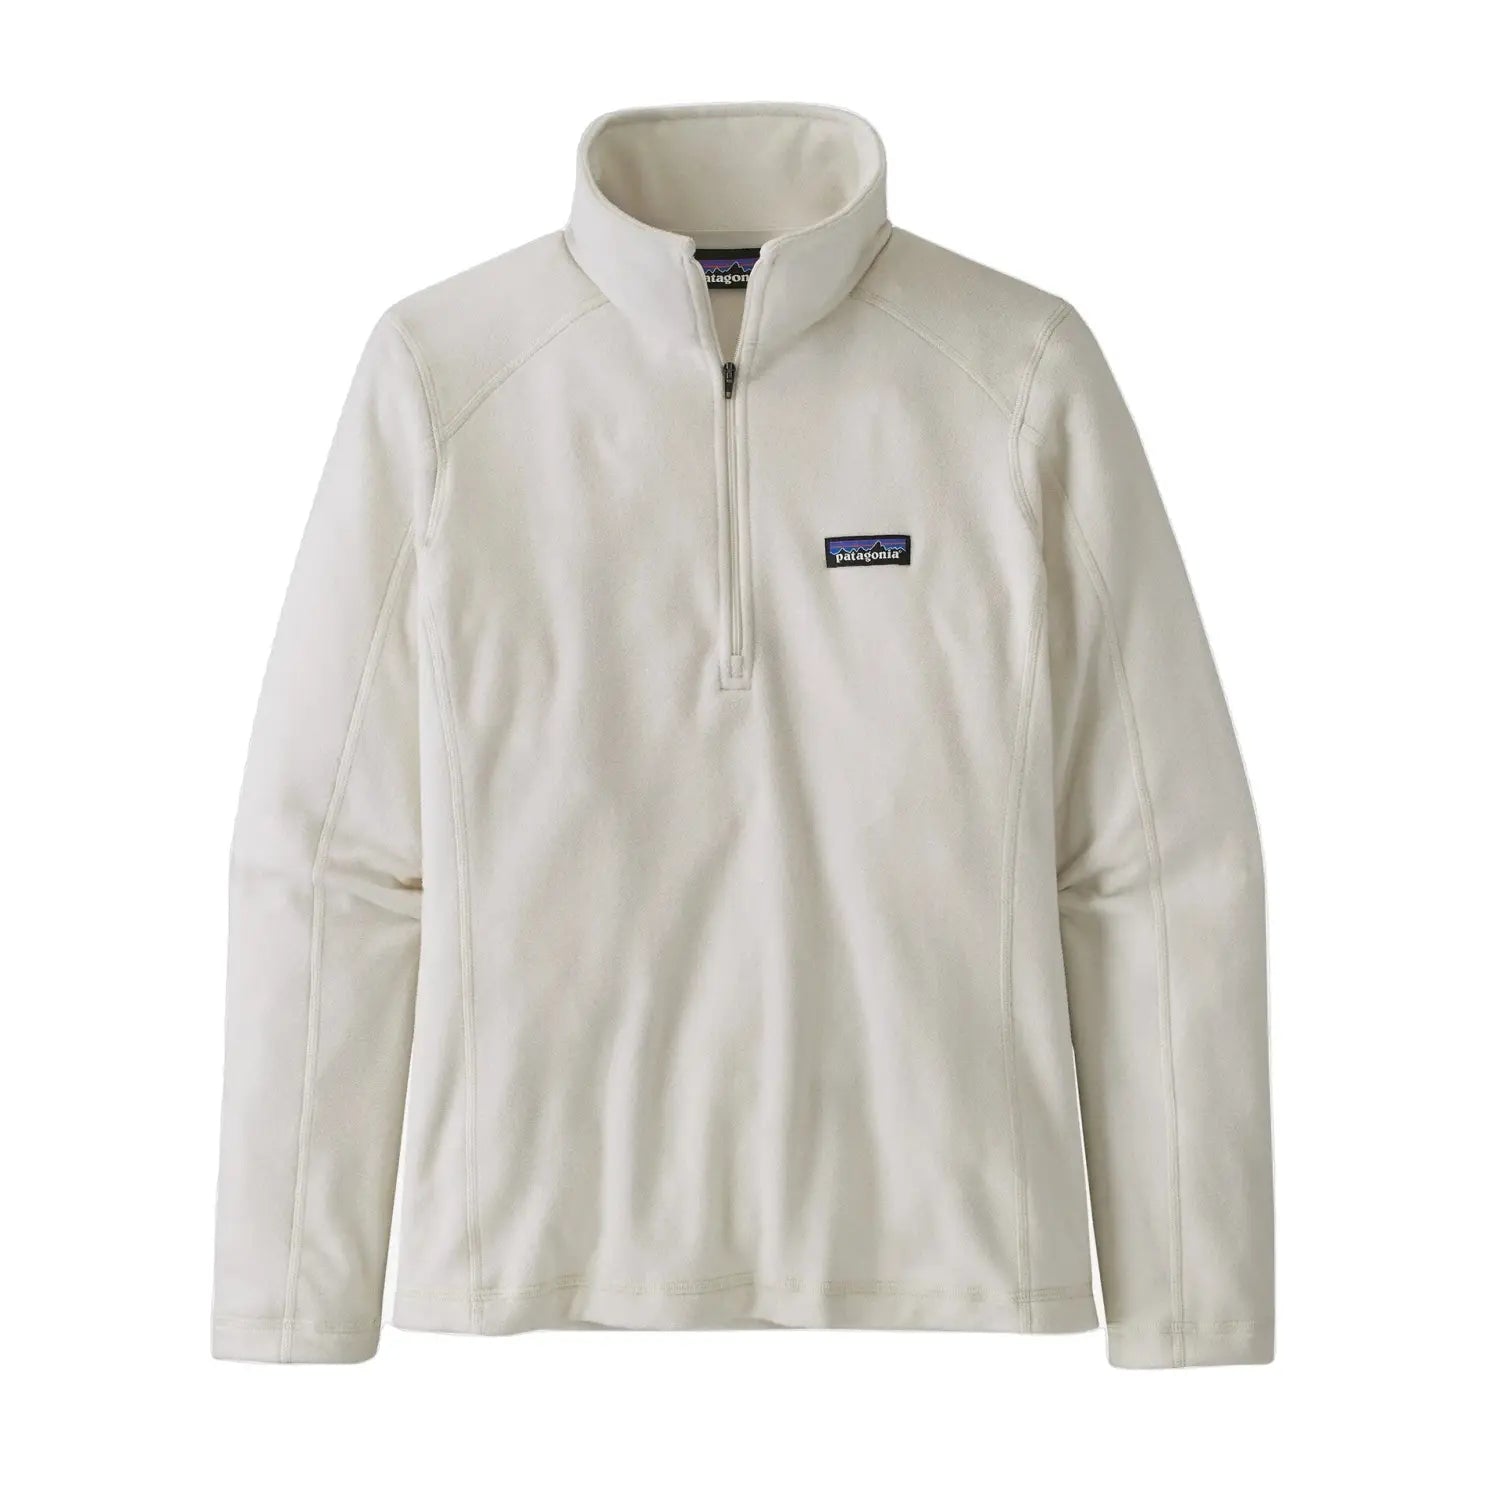 Patagonia Women's Micro D® 1/4-Zip Fleece shown in white color option. Front view.